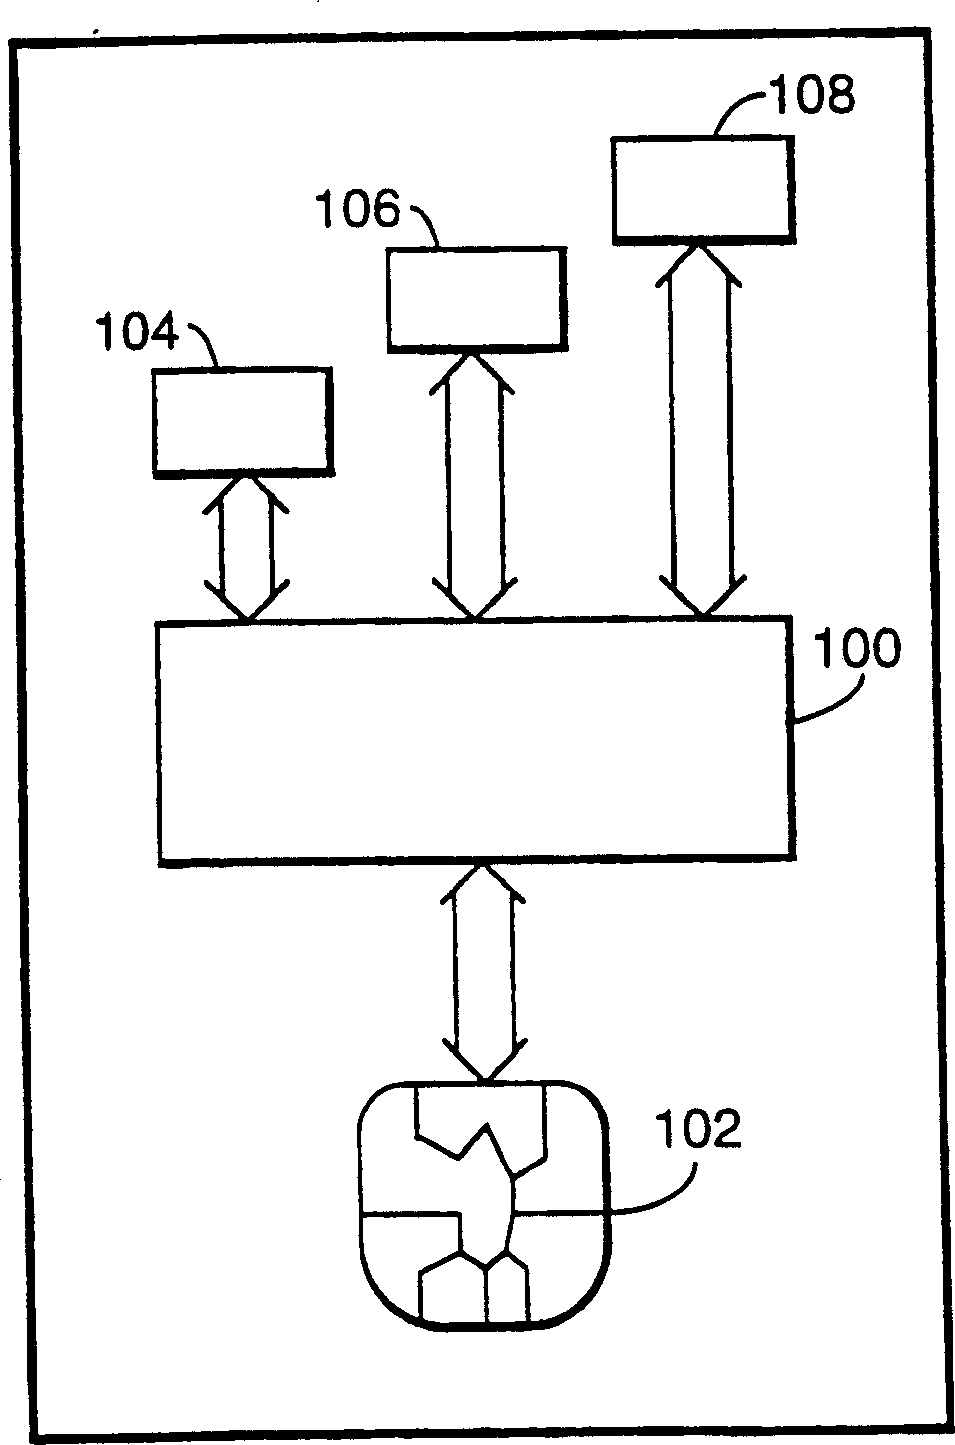 Method and apparatus for preventing fraudulent access in conditional access system